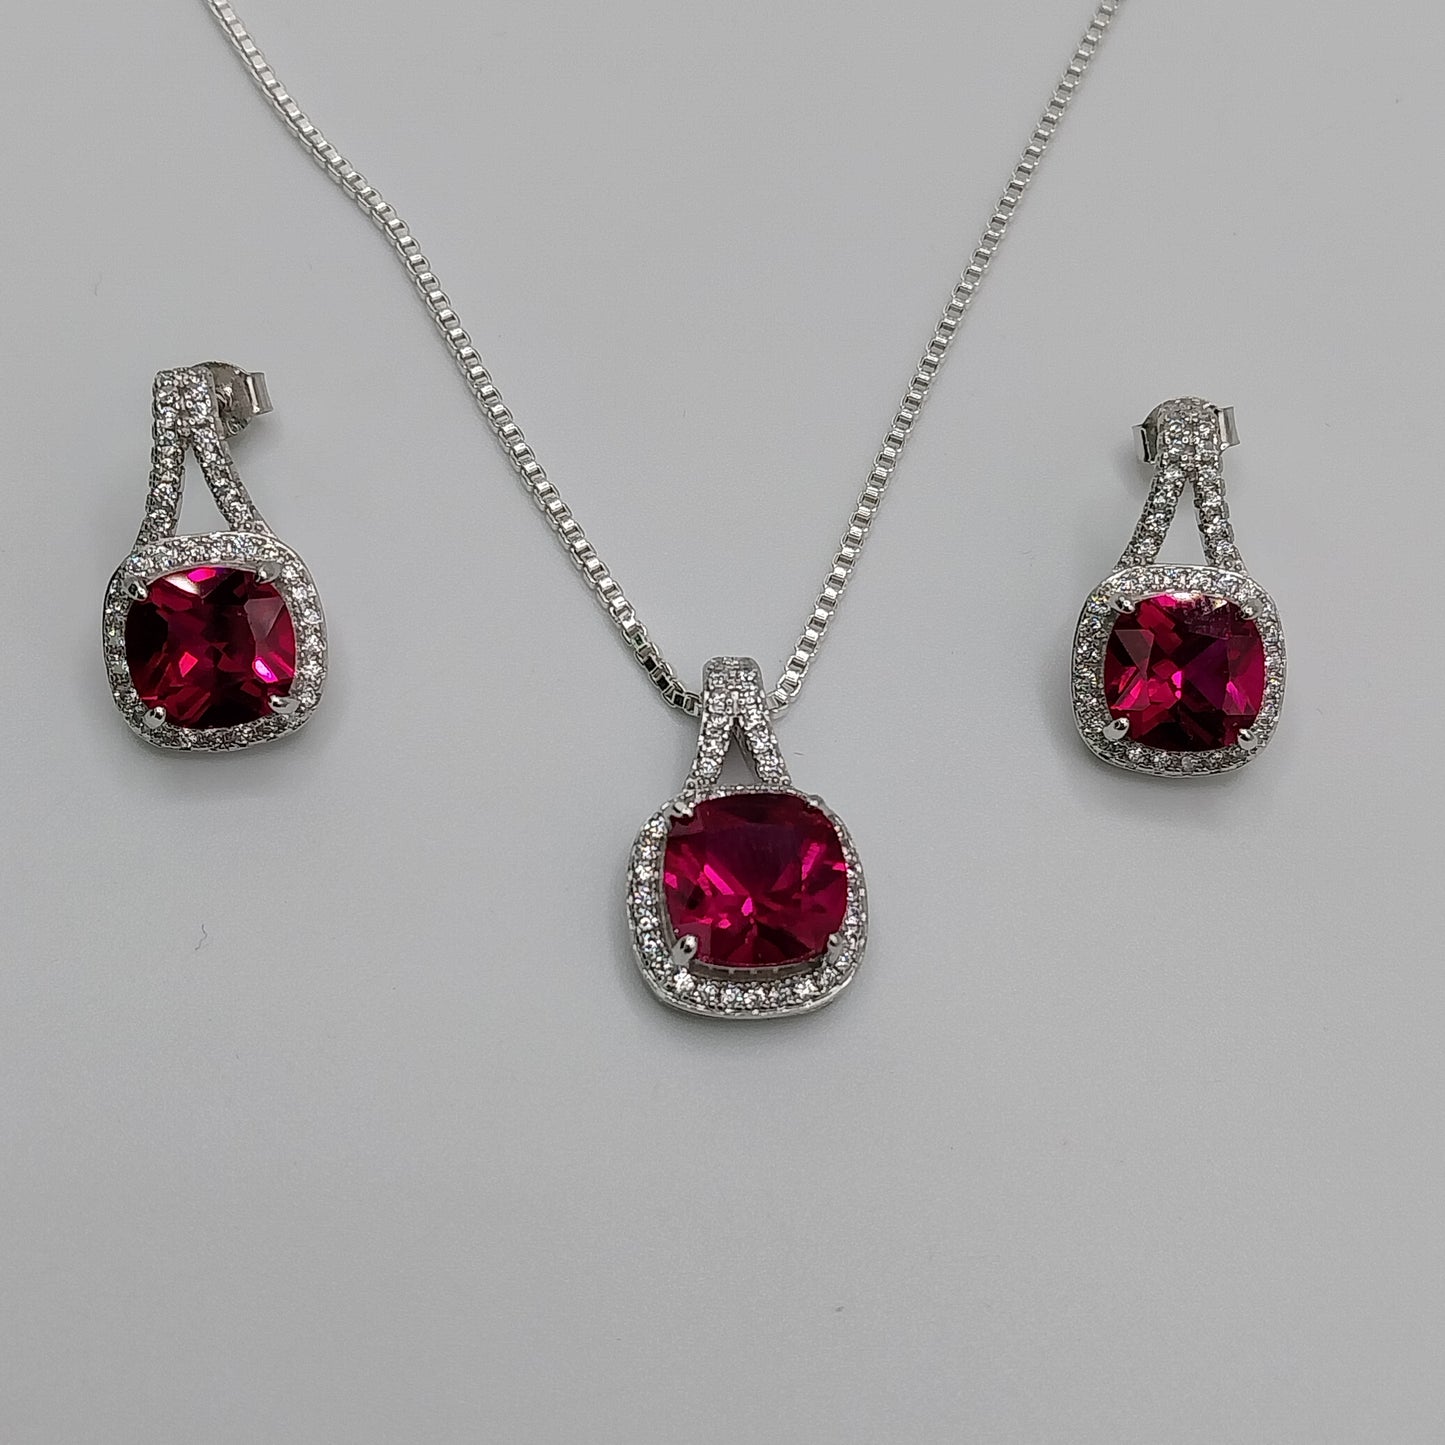 Princess Style Earrings and Necklace Set with CZ Stones and Box Style Chain